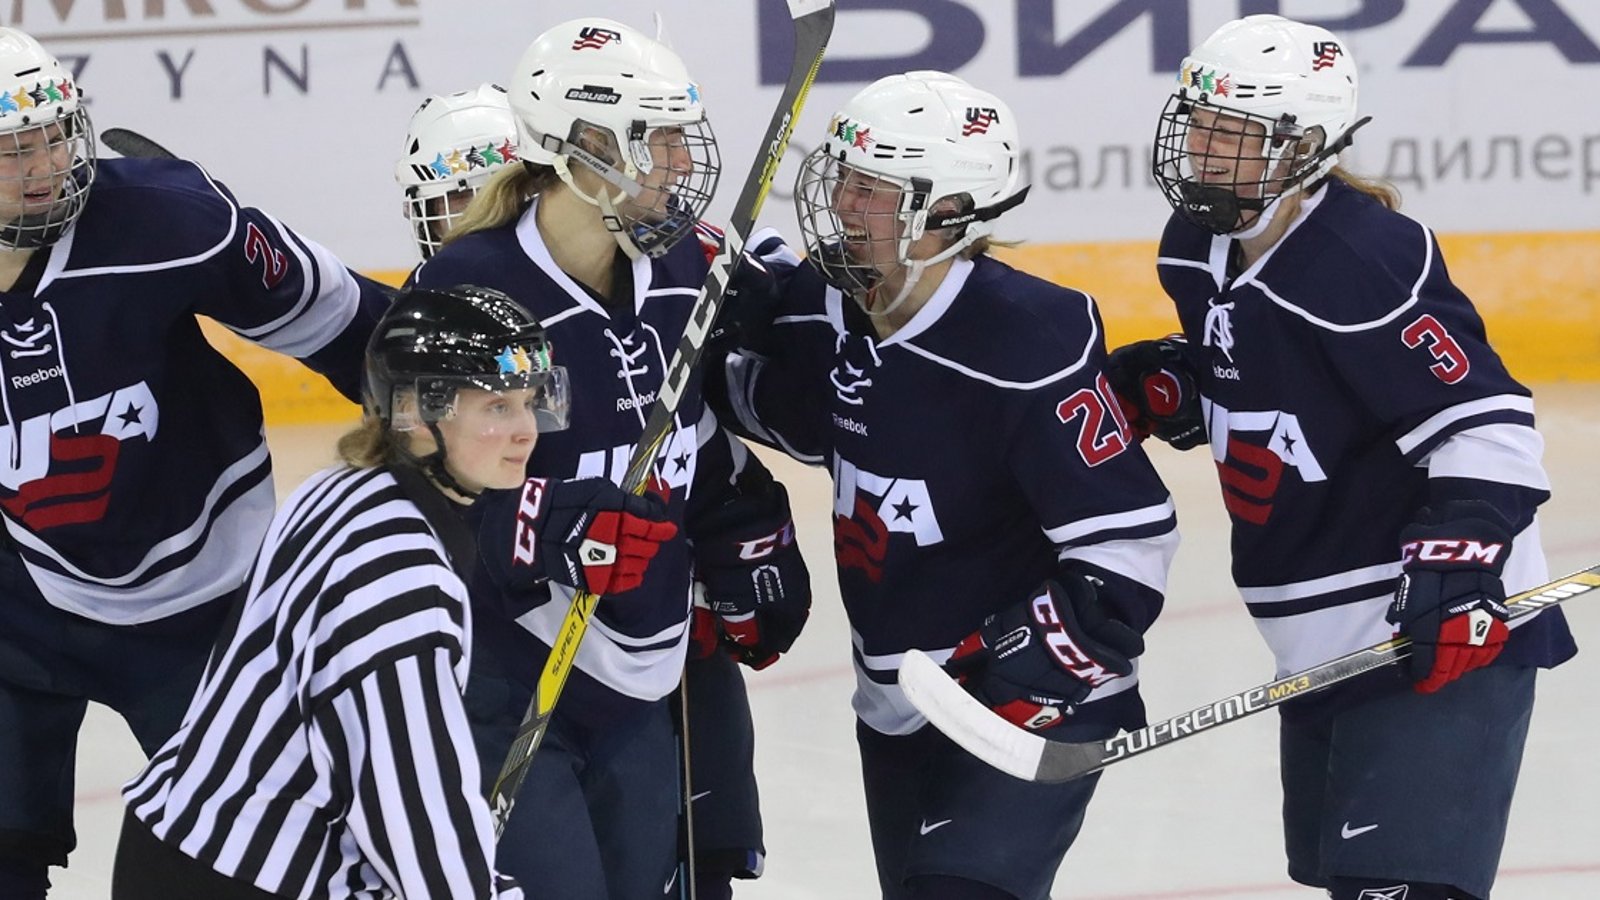 USA Hockey says demands from the women's team is actually millions of dollars.